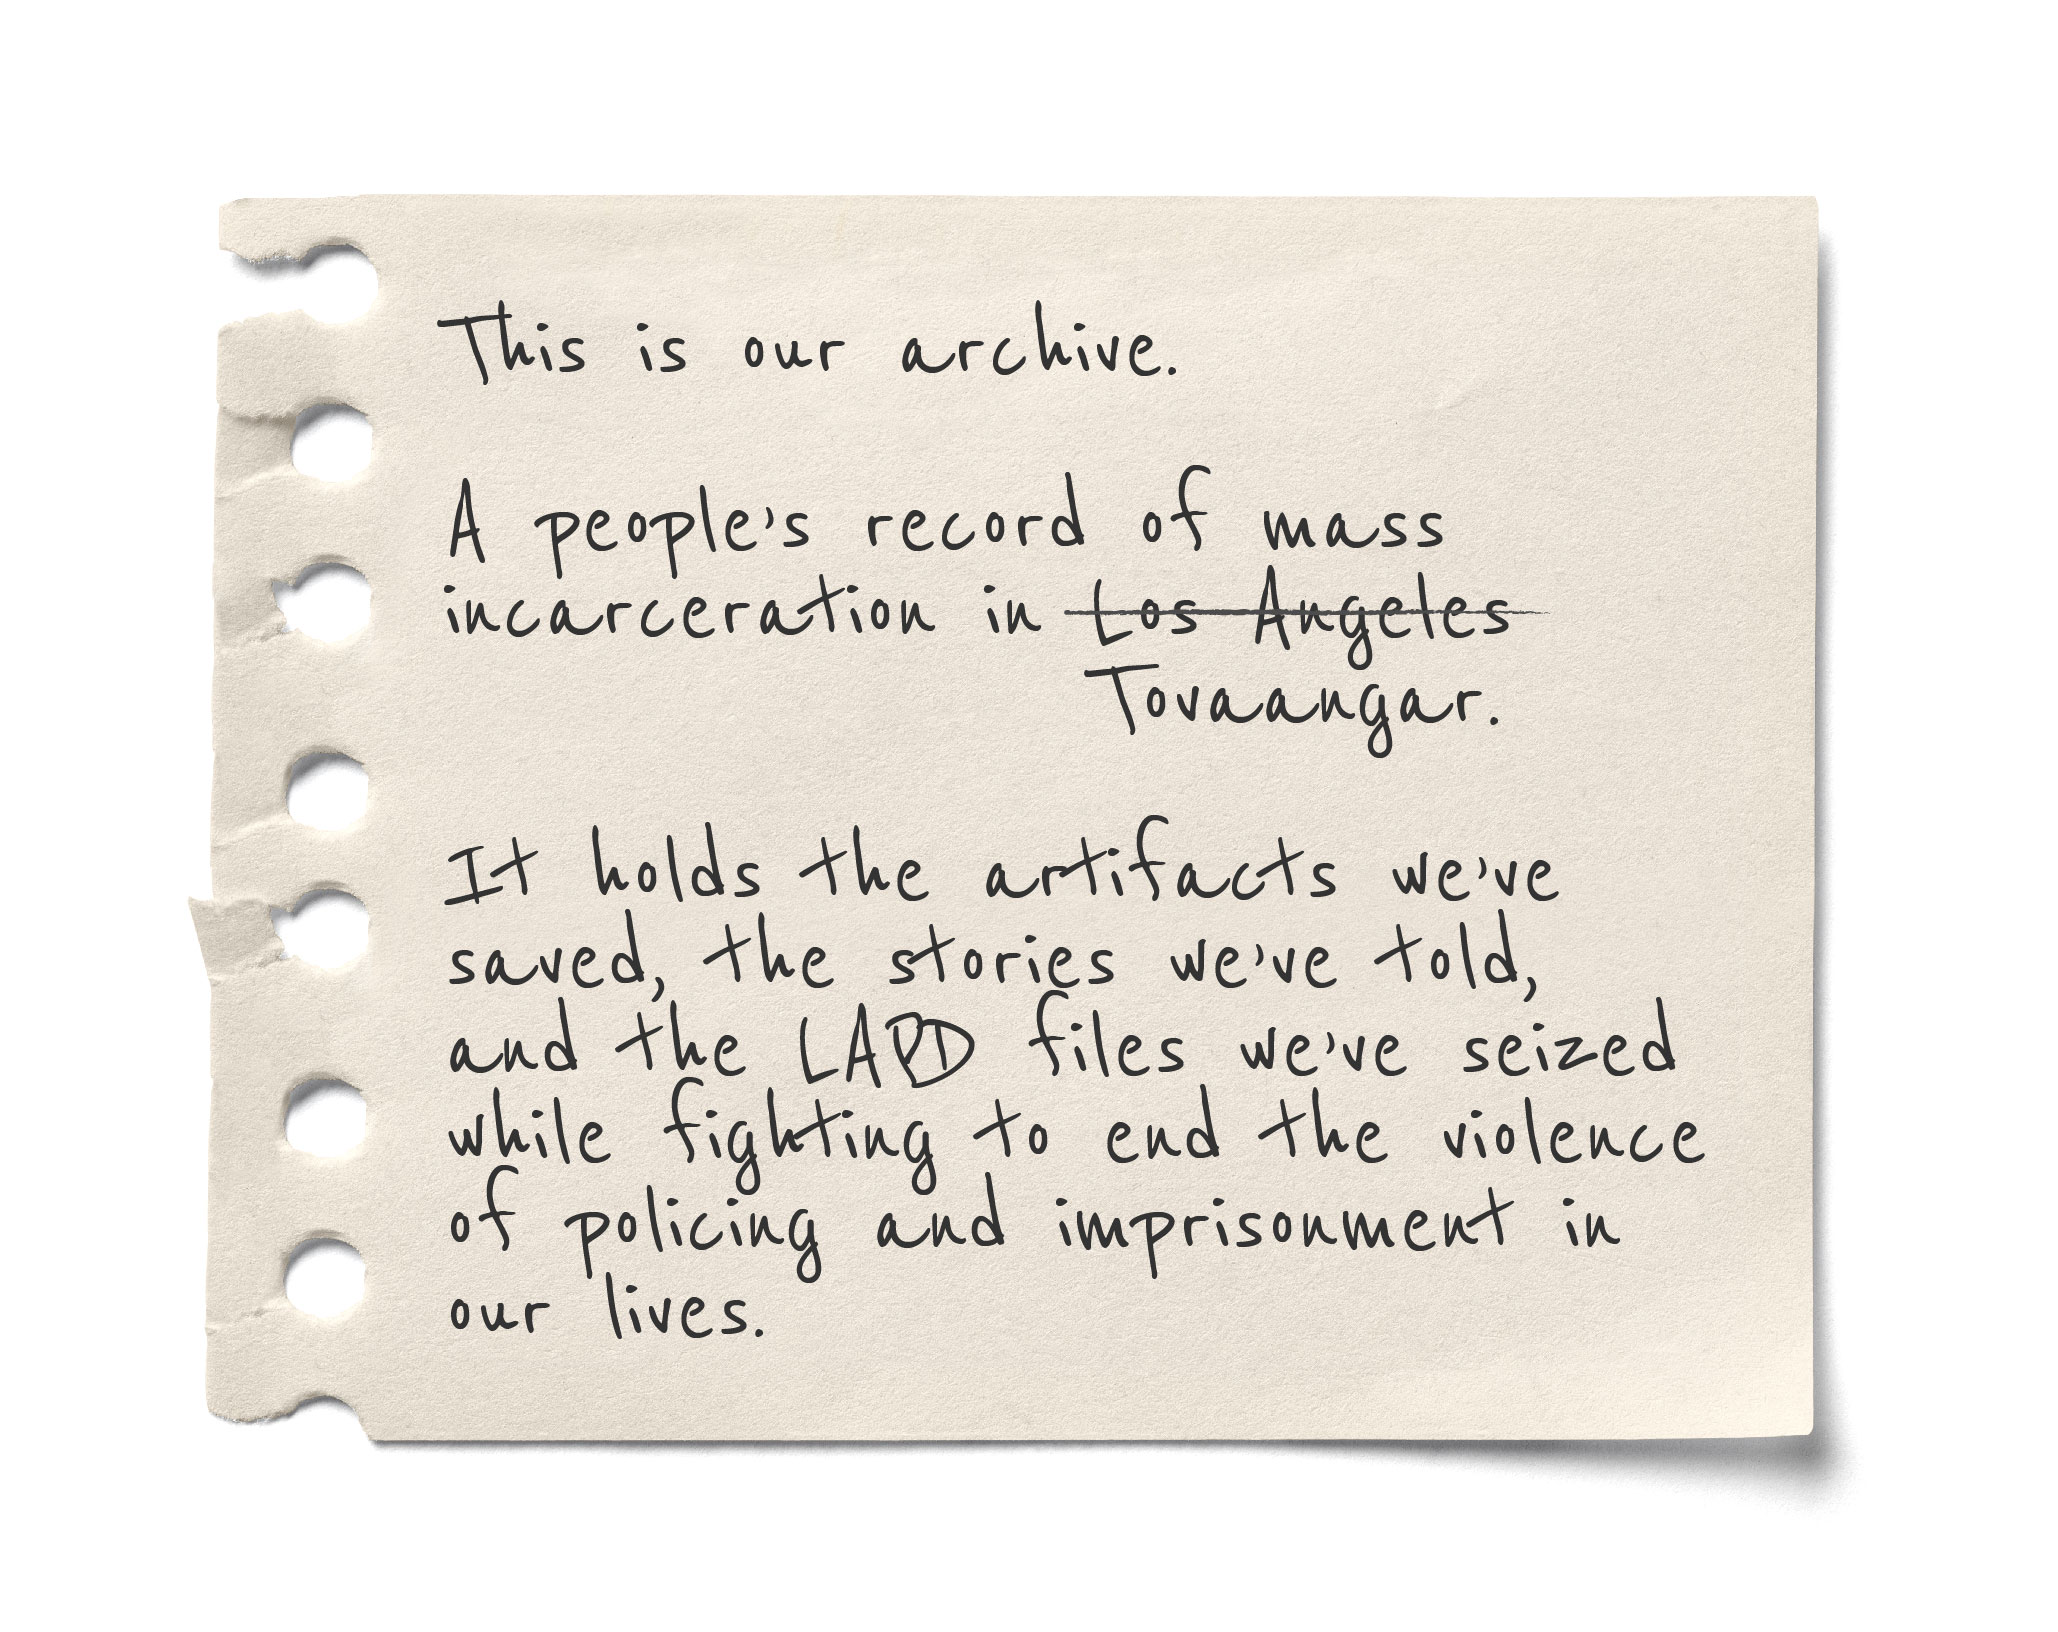 Ripped note page with a message: This is our archive. A people’s record of mass incarceration in Tovaangar. It holds the artifacts we’ve saved, the stories we’ve told, and the LAPD file we’ve seized while fighting to end the violence of policing and imprisonment in our lives.